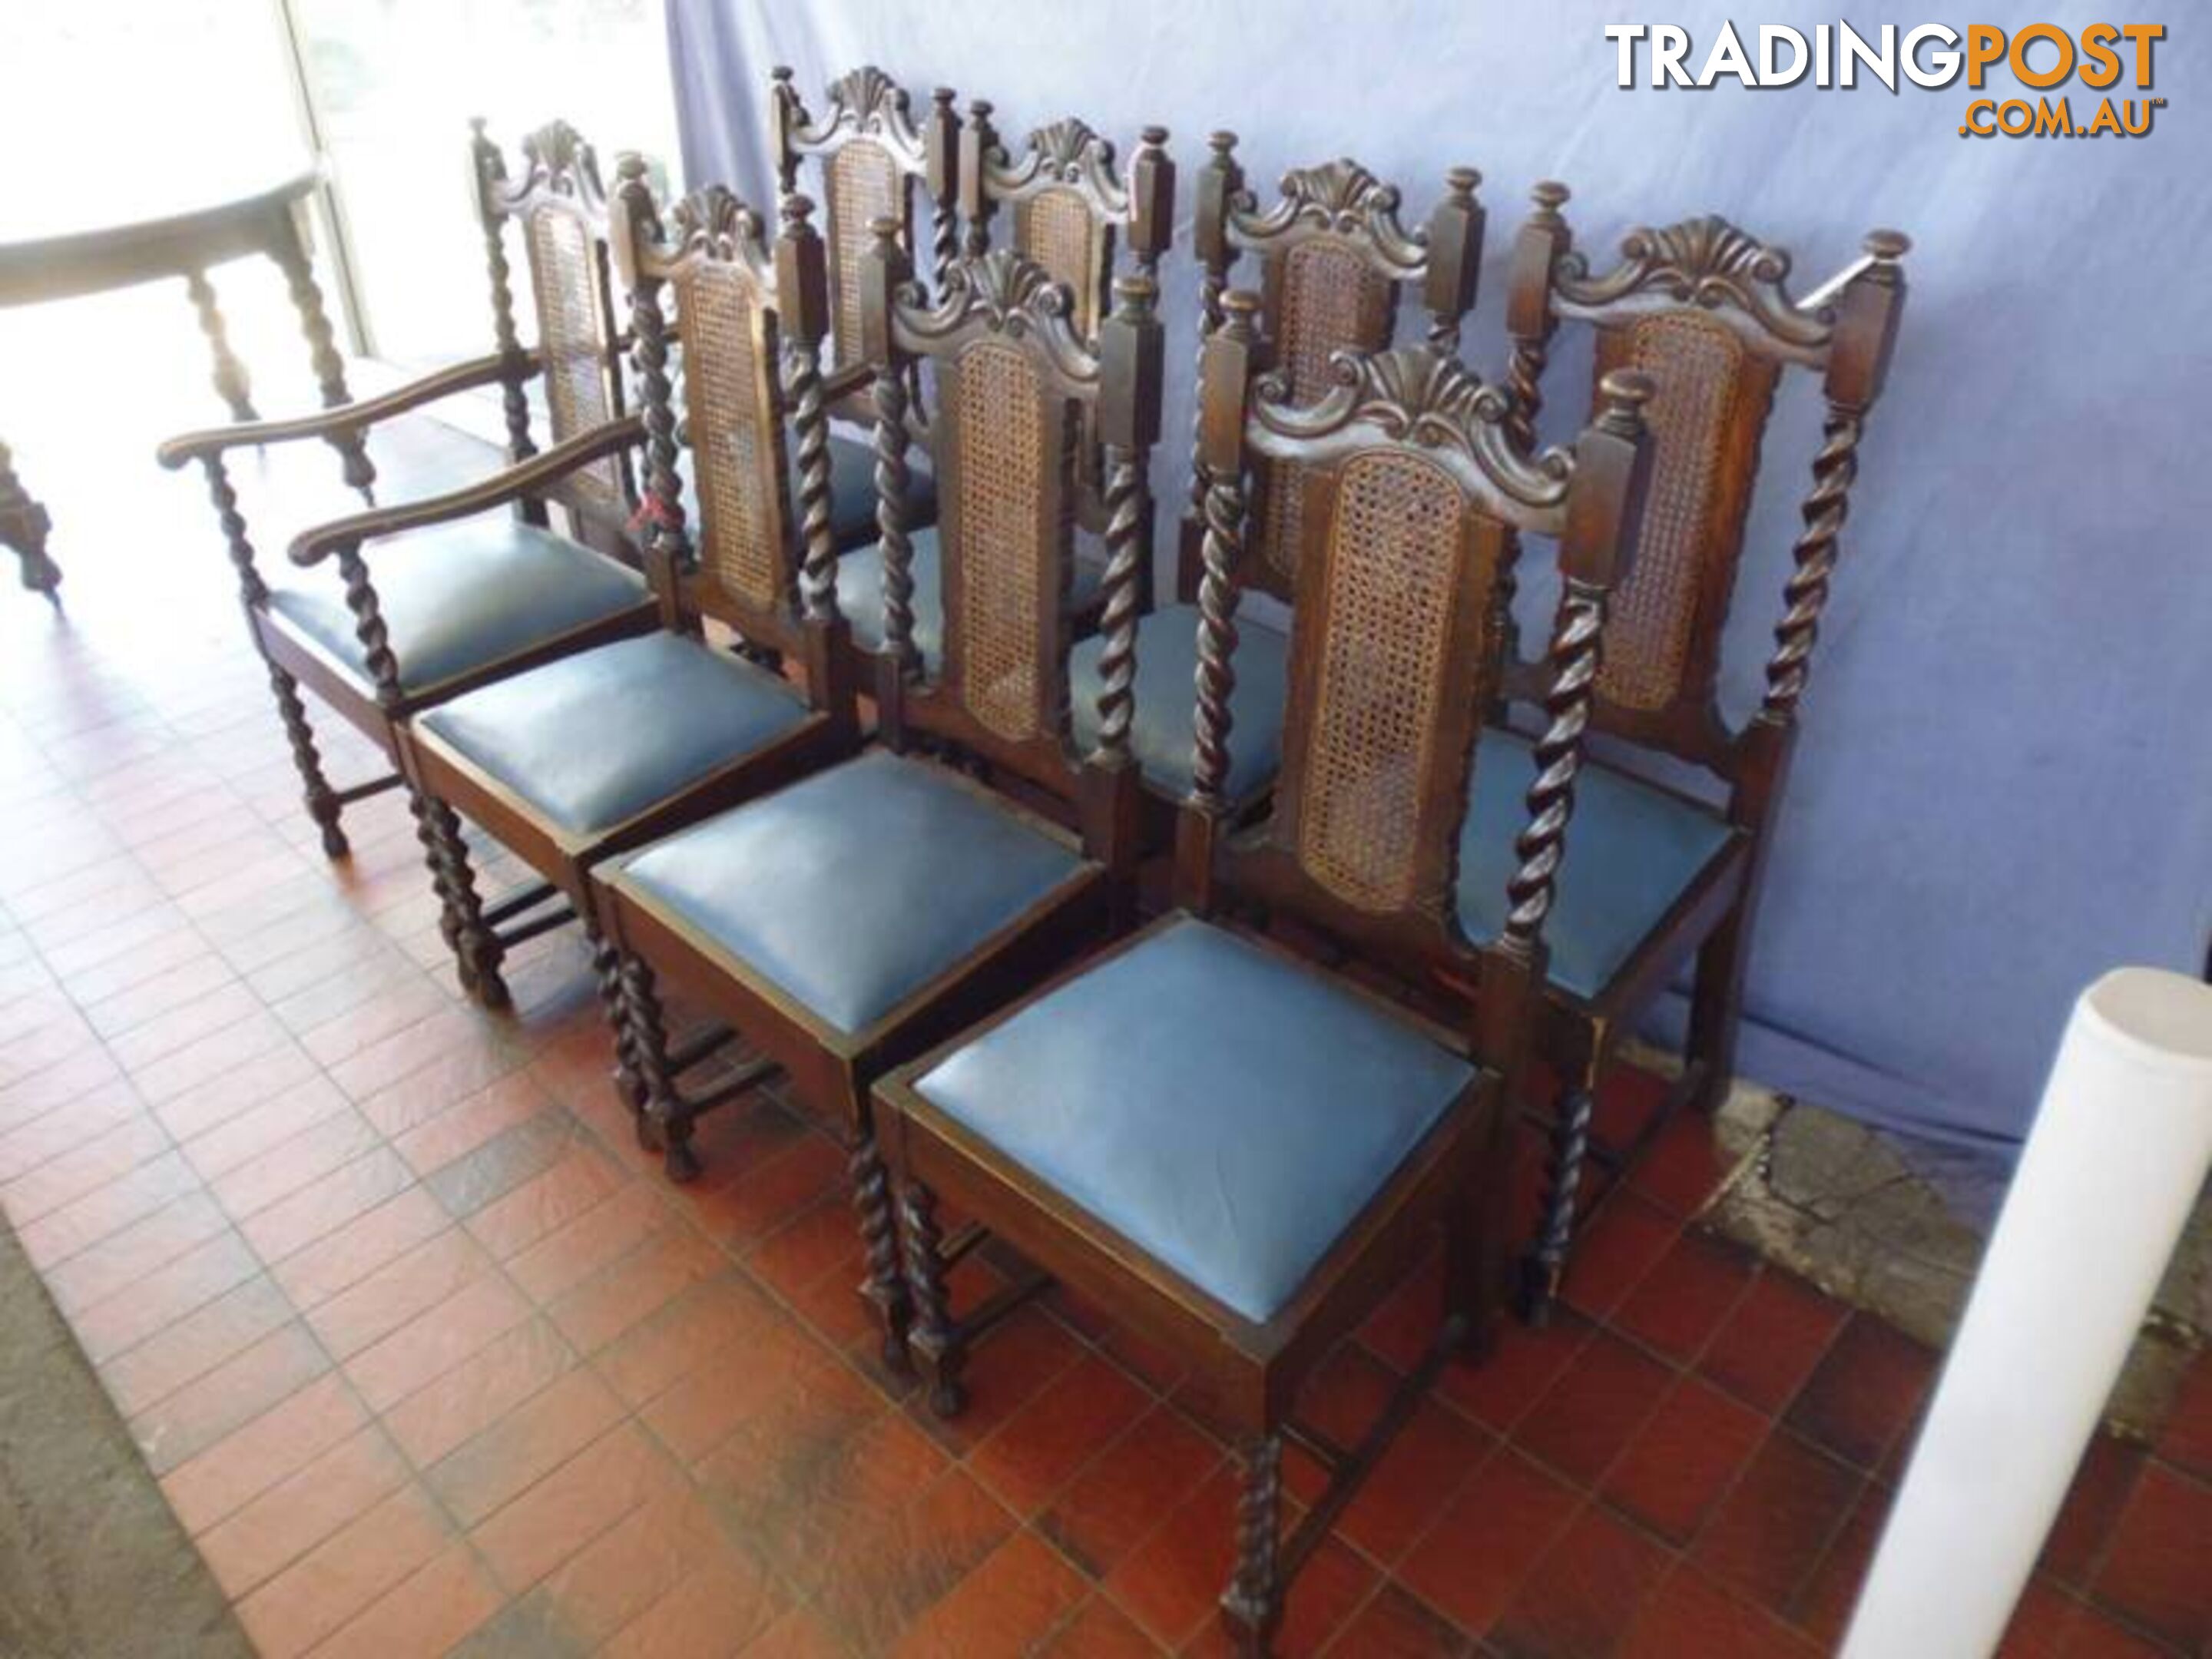 Jaco Table + 8 Chairs incl. 2 carvers, 2 leaves and crank, 368719